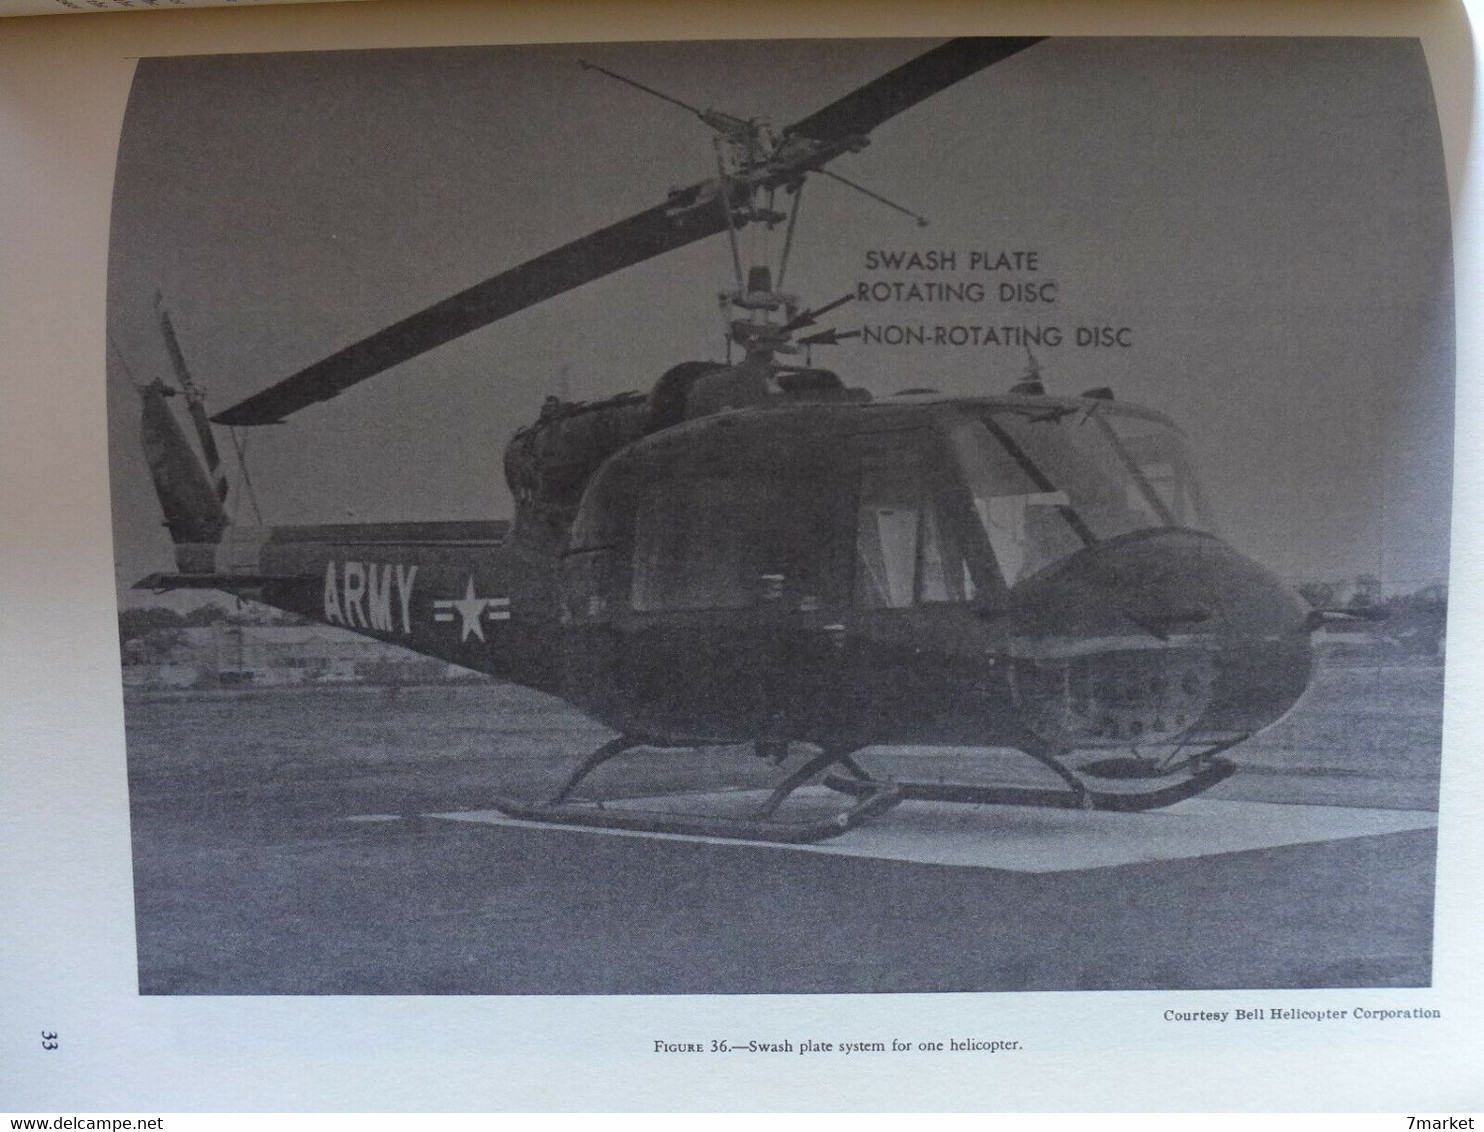 Basic Guide To Helicopters. Helicopters Aerodynamics, Performance & Flight Maneuvers / éd. Drake - 1978; En Anglais - Helicopters